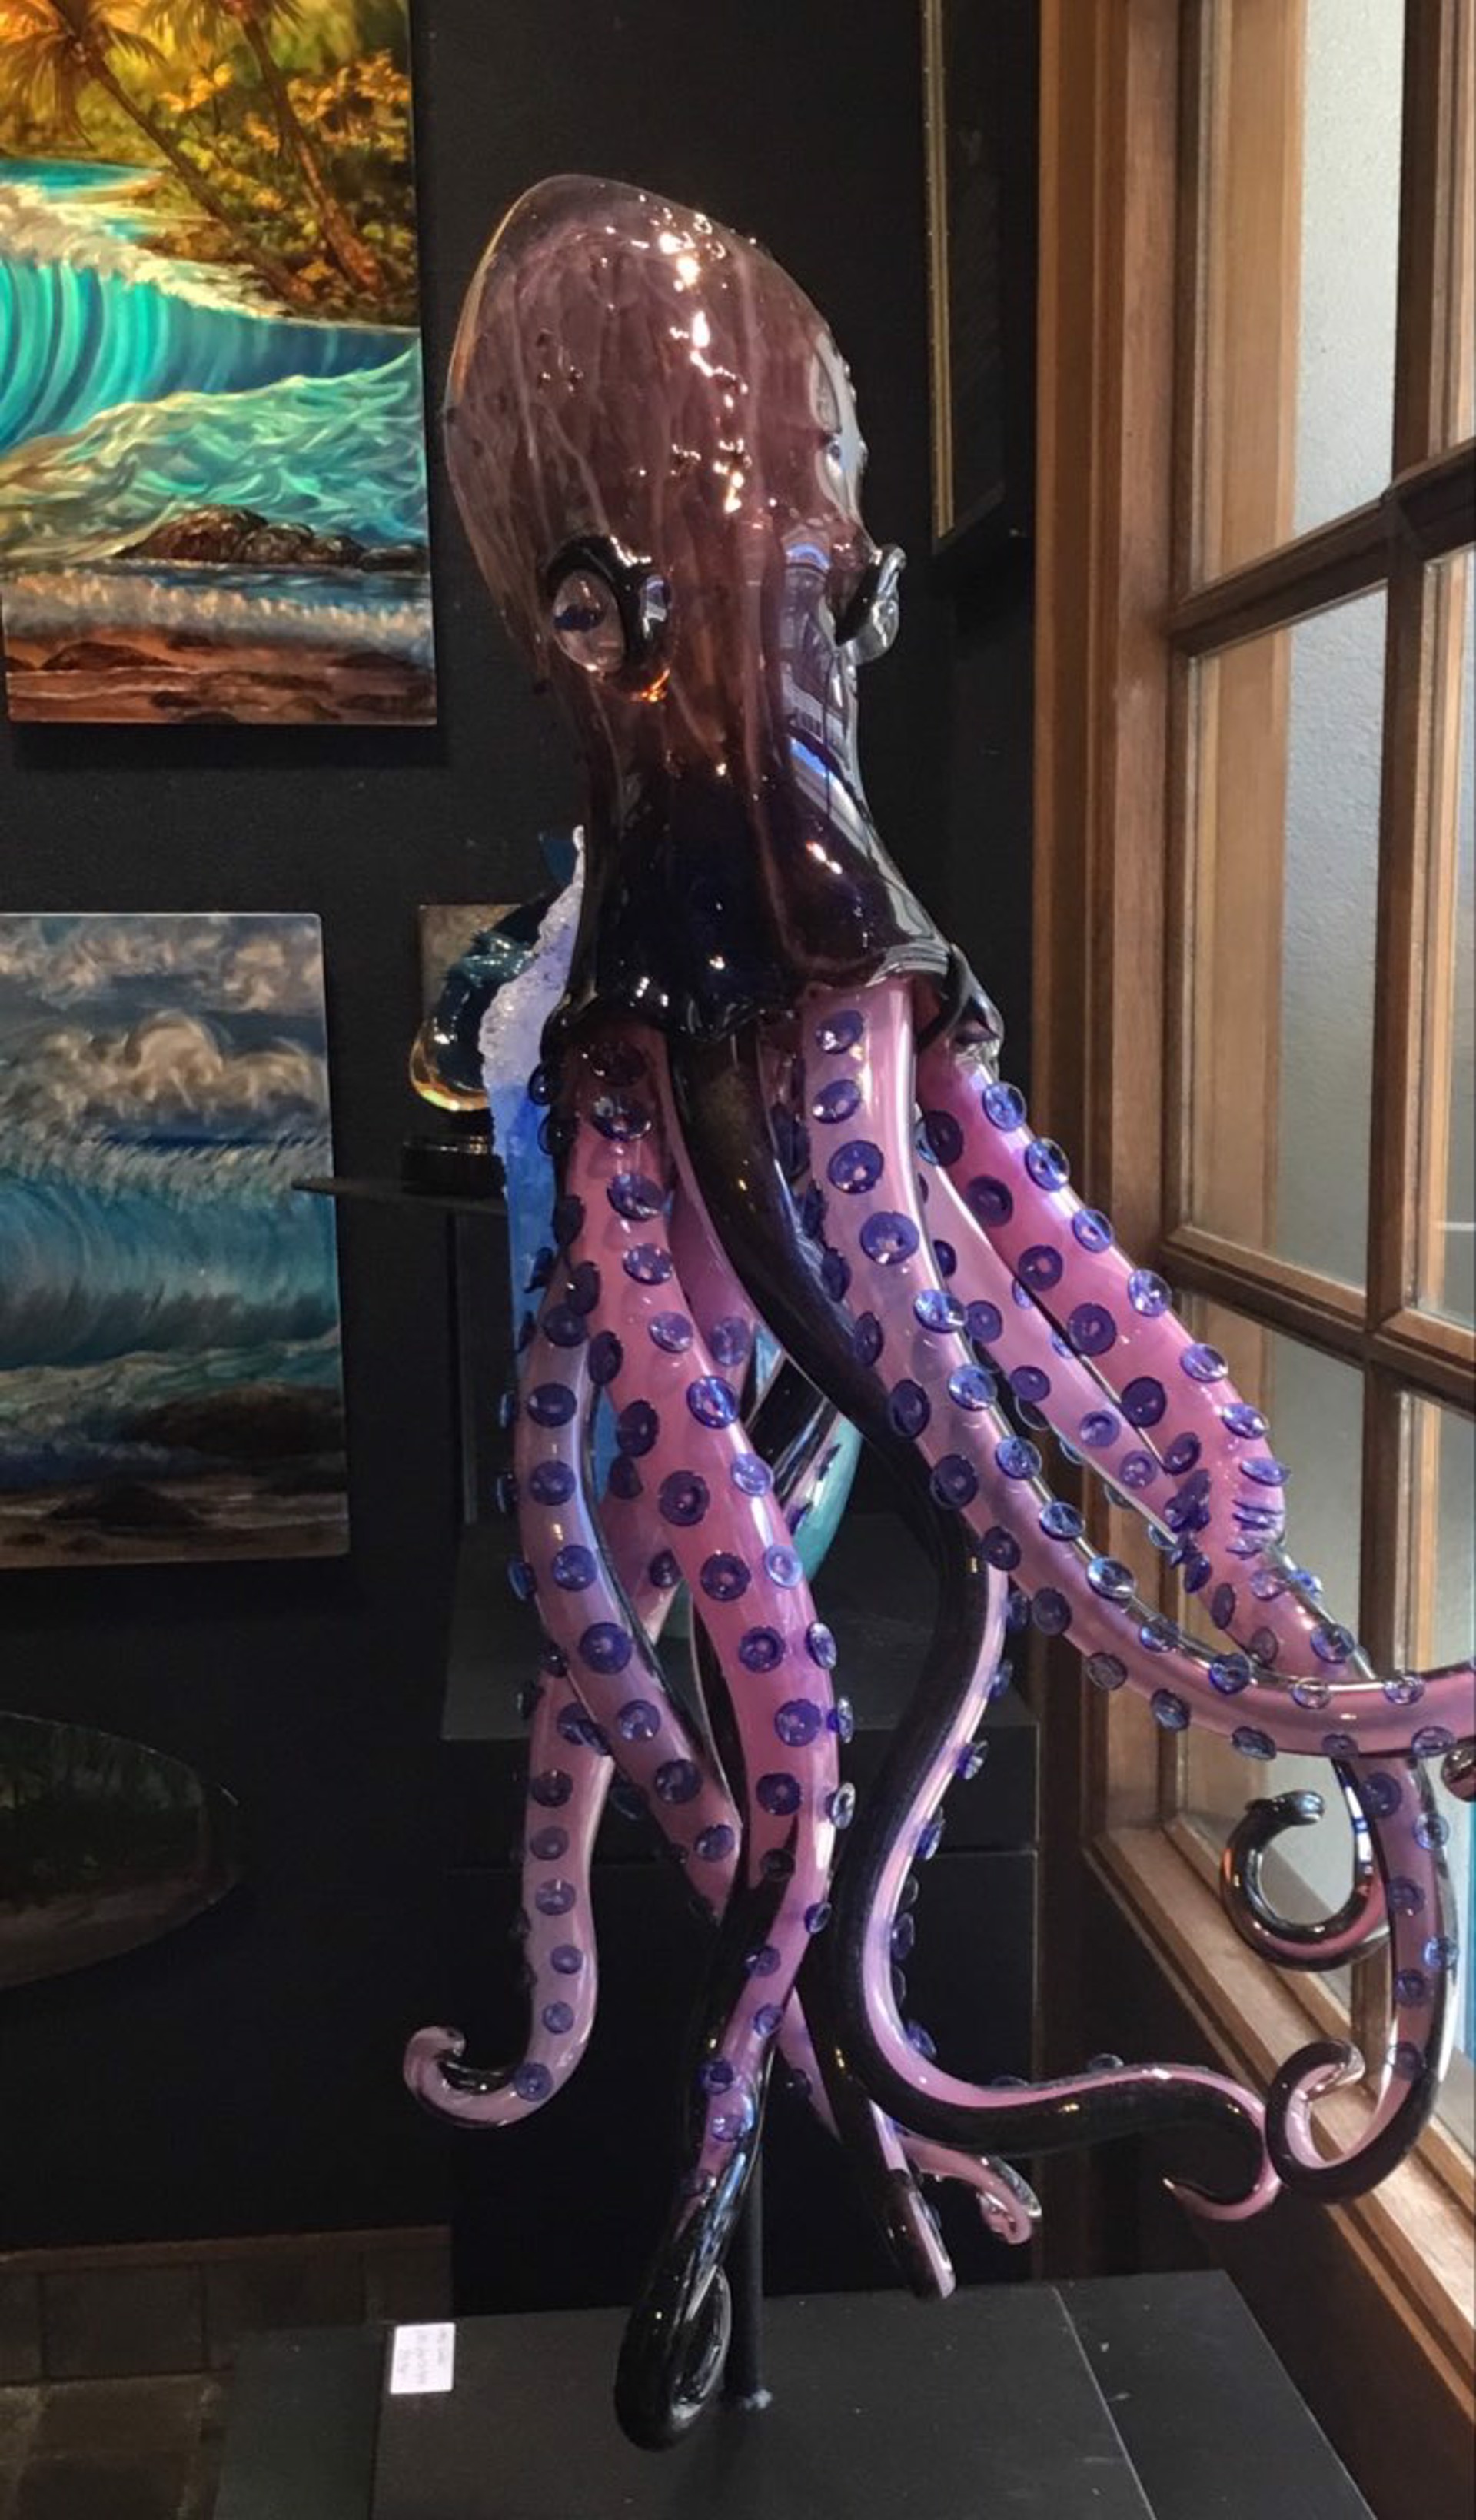 Giant Octopus, 2021 by Charles Lowrie